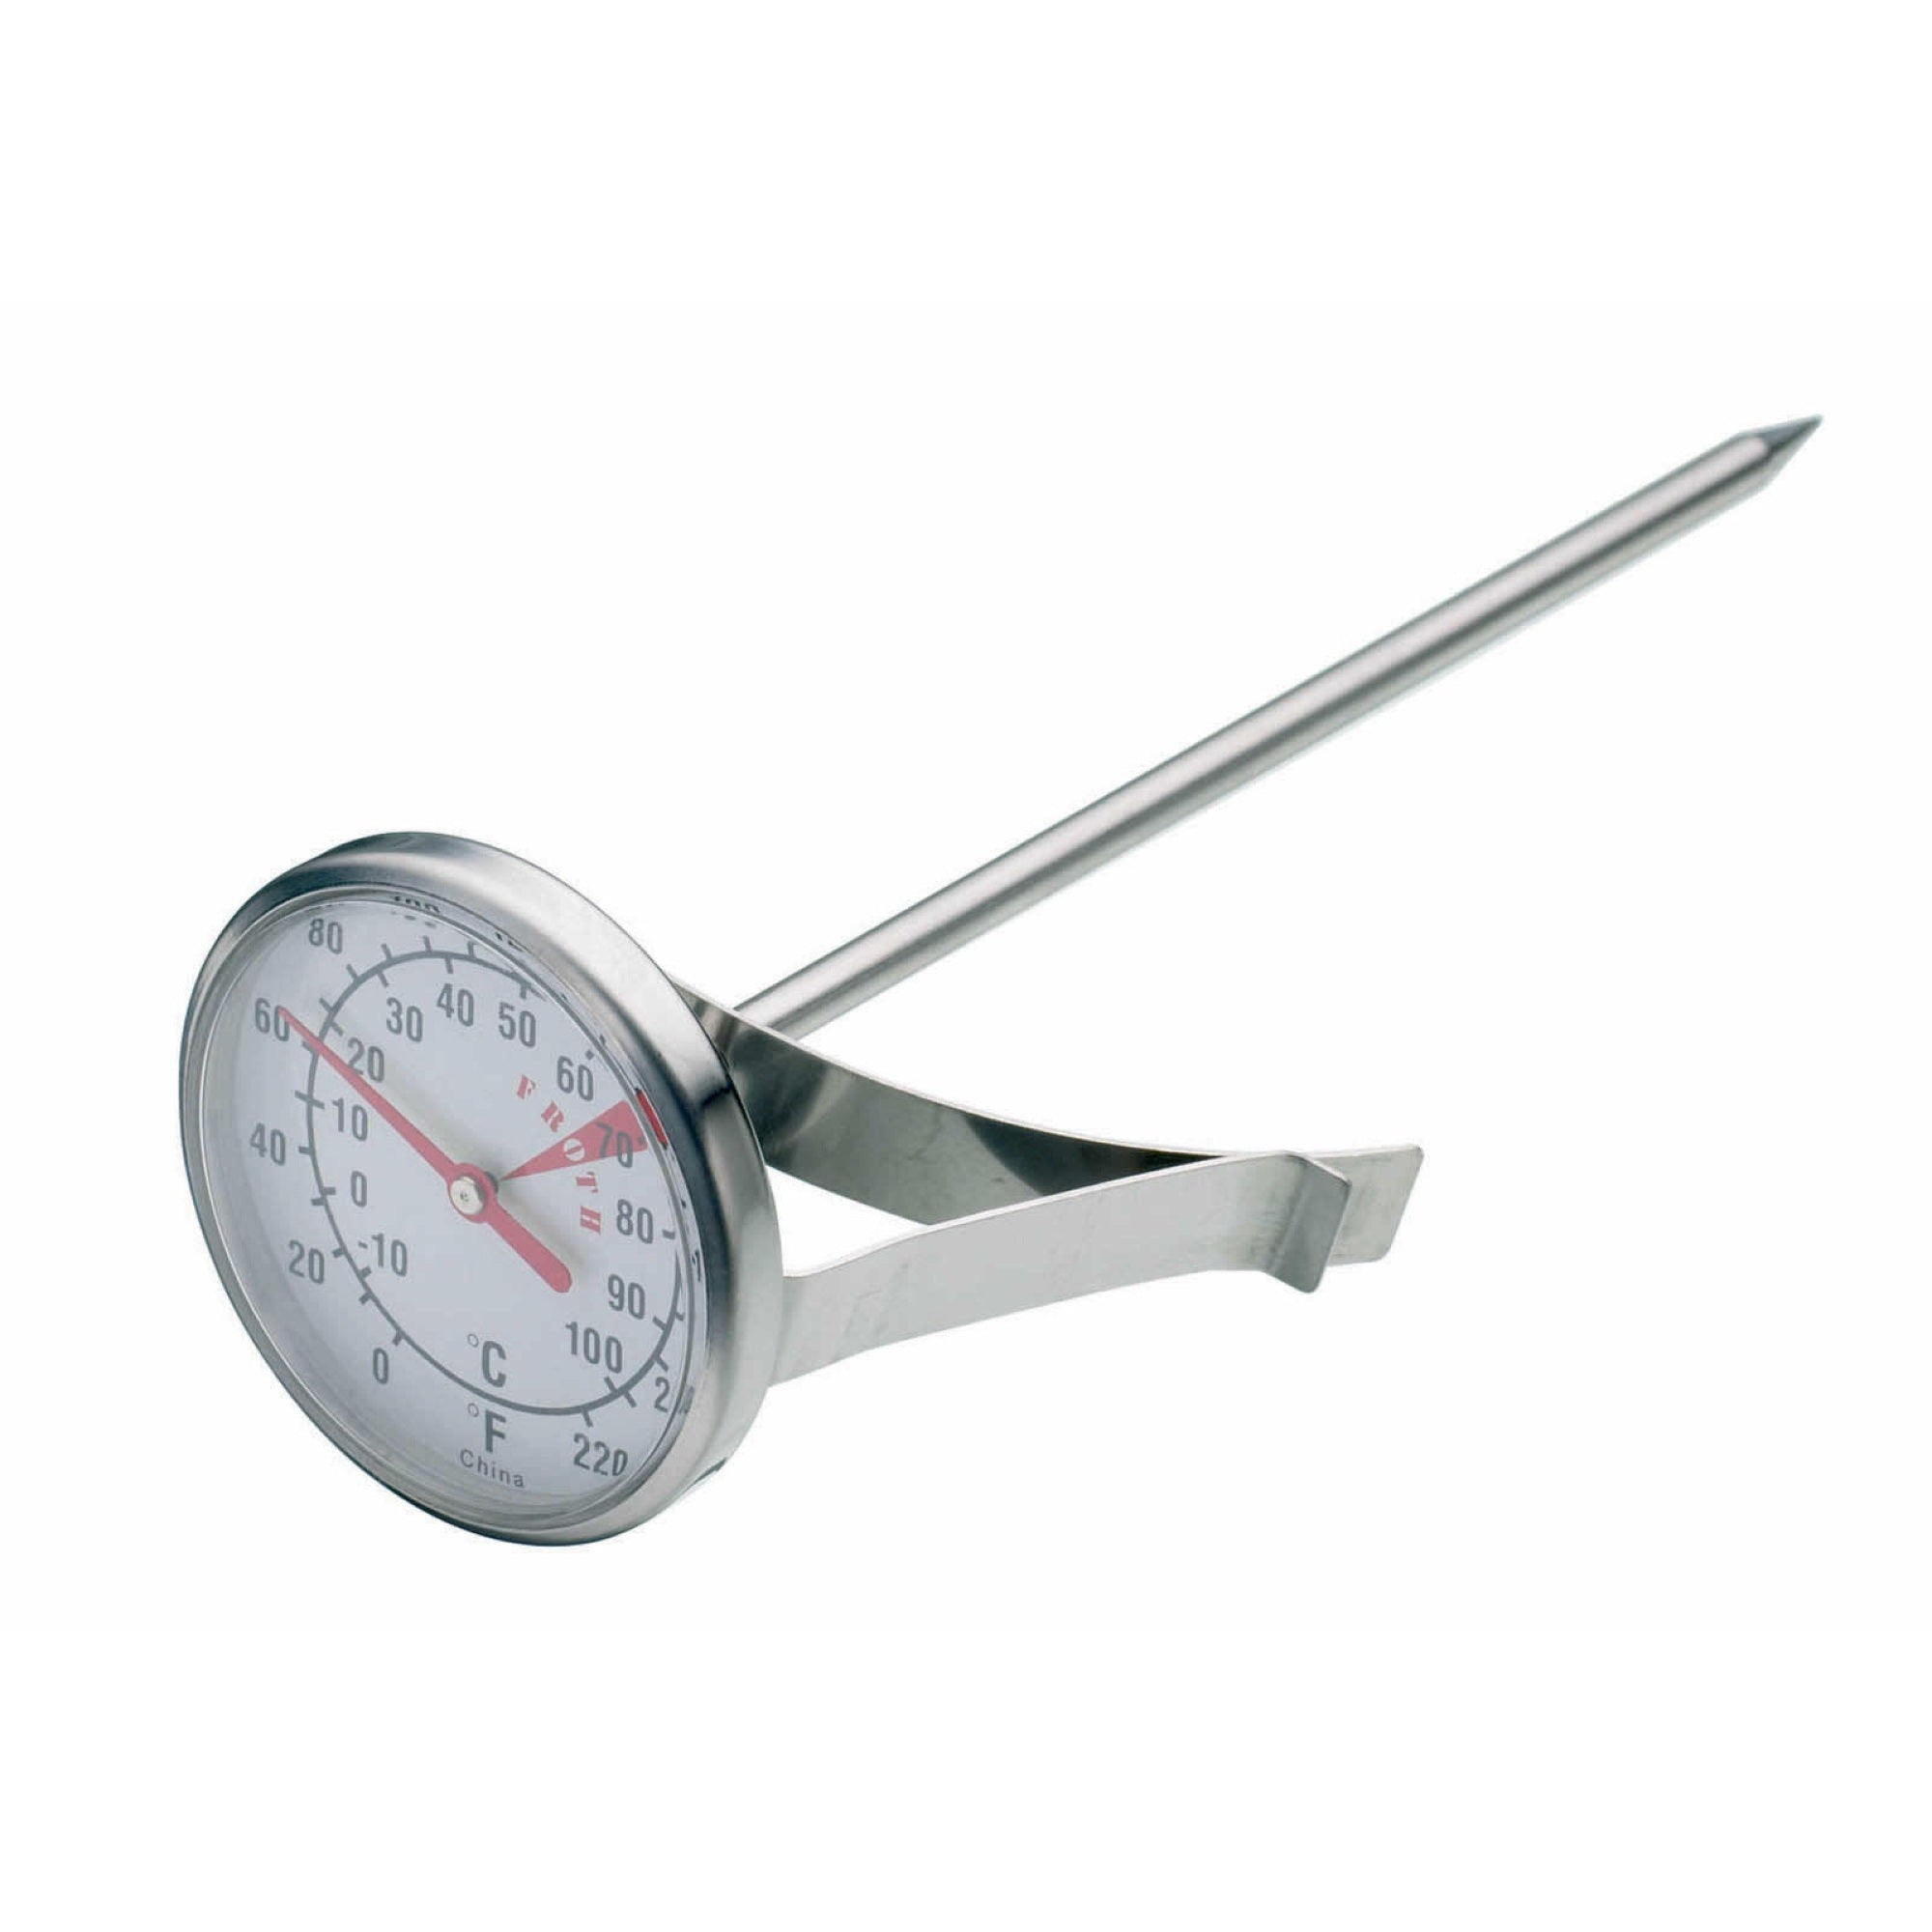 KitchenCraft Stainless Steel Milk Frothing Thermometer - The Cooks Cupboard Ltd